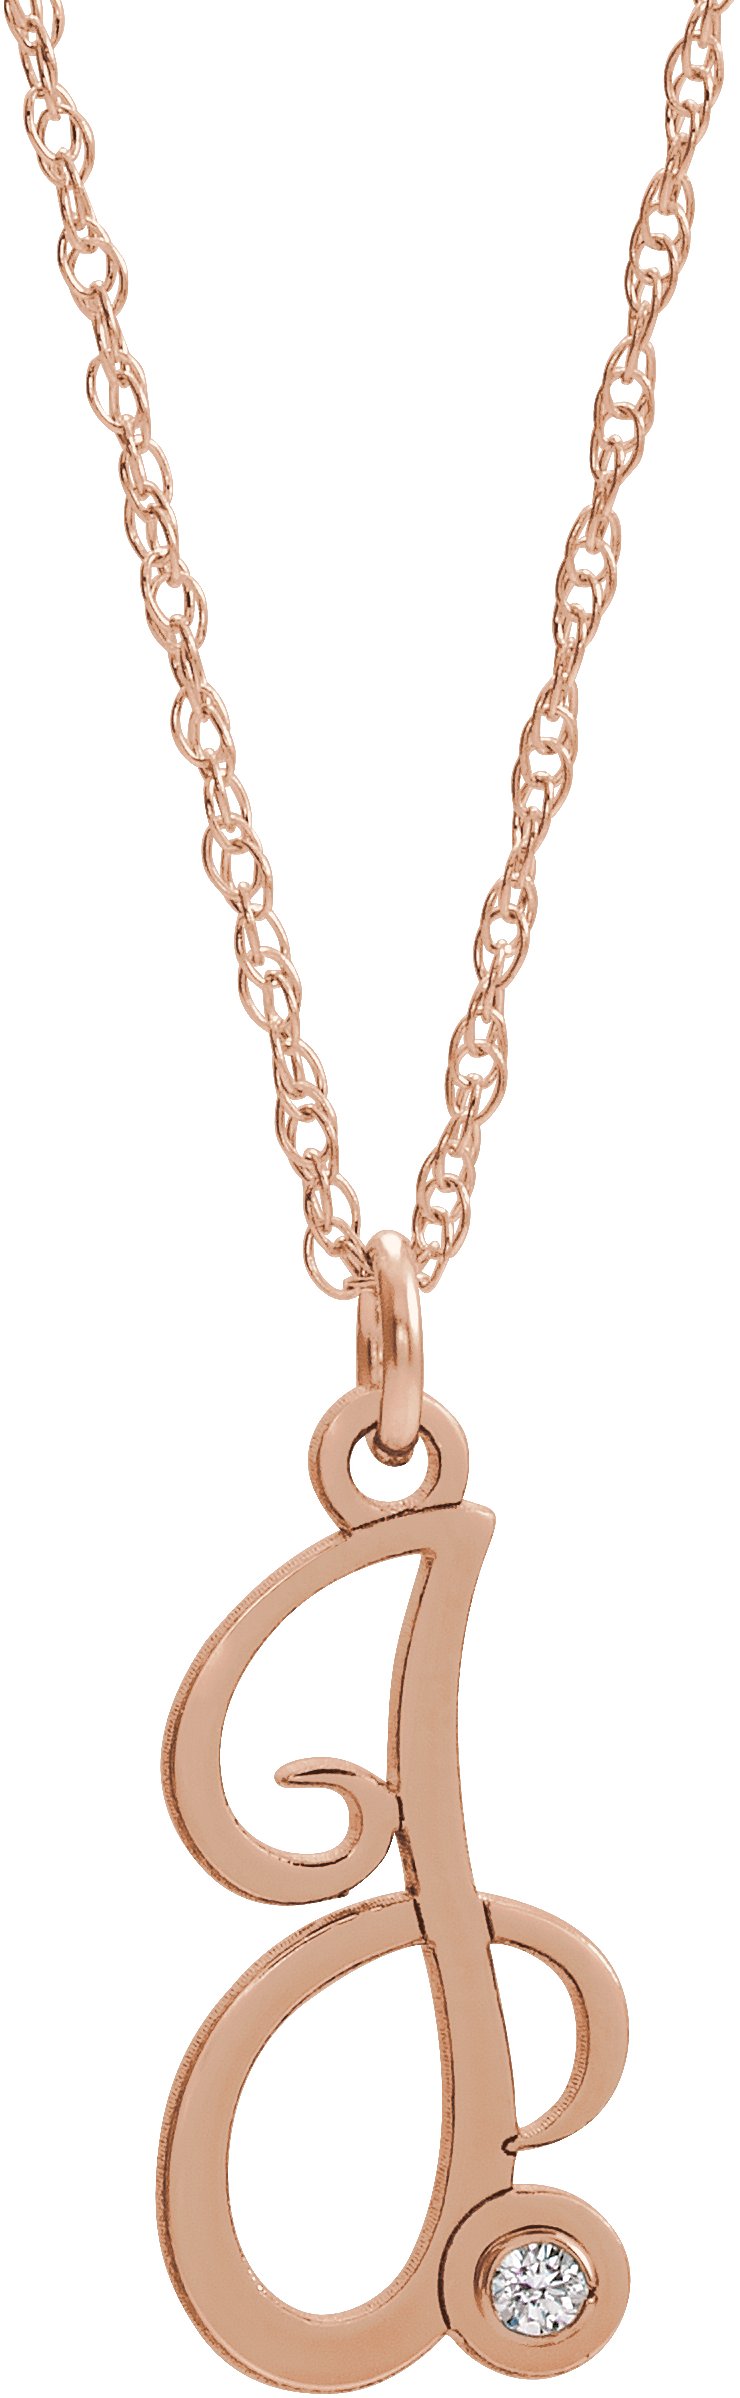 14K Rose Gold-Plated Sterling Silver .02 CT Diamond Script Initial J 16-18" Necklace